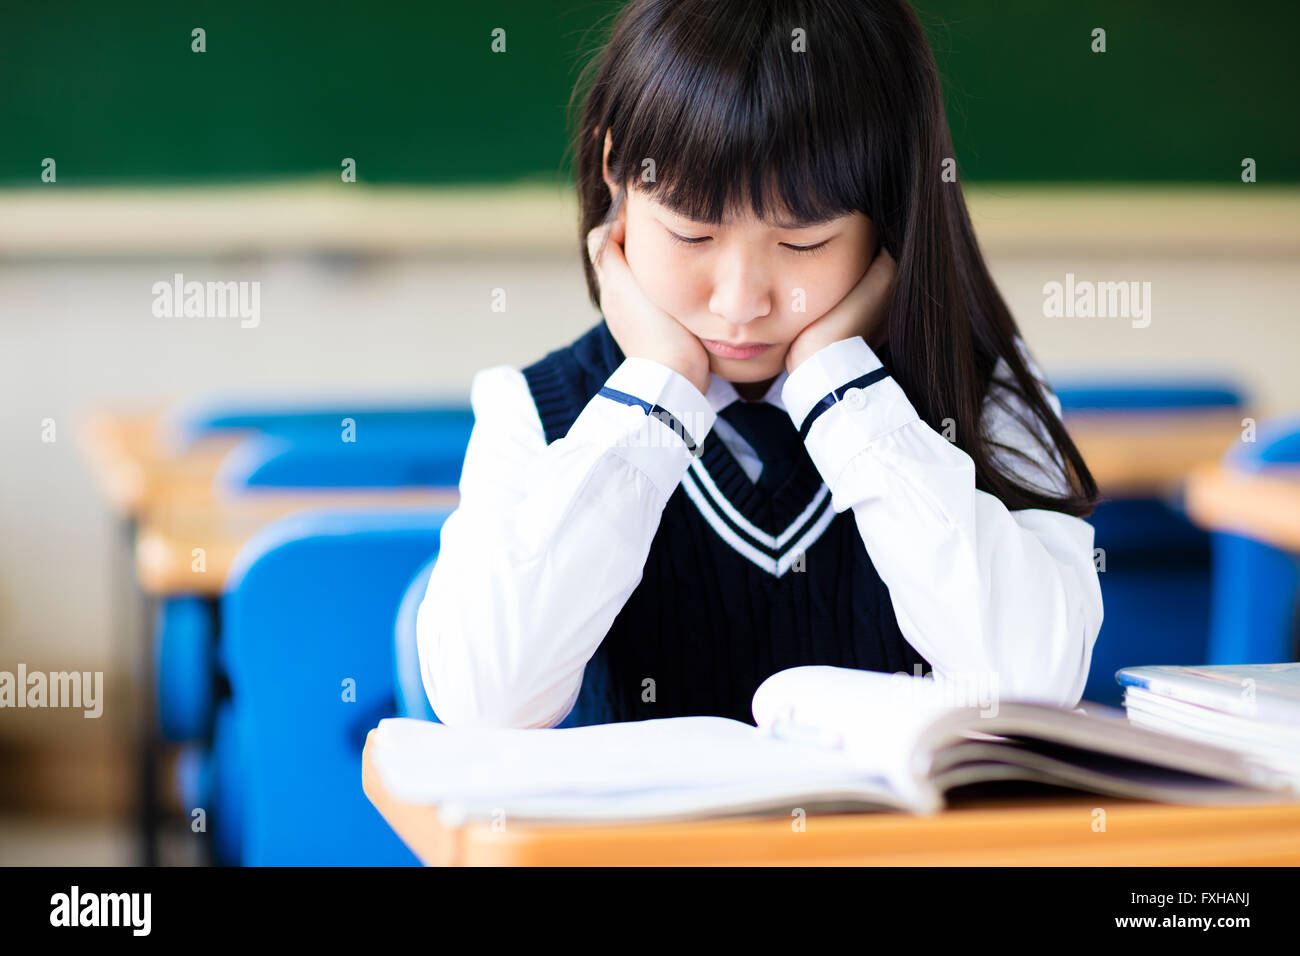 Stressed Student Of High School Sitting in classroom Stock Photo